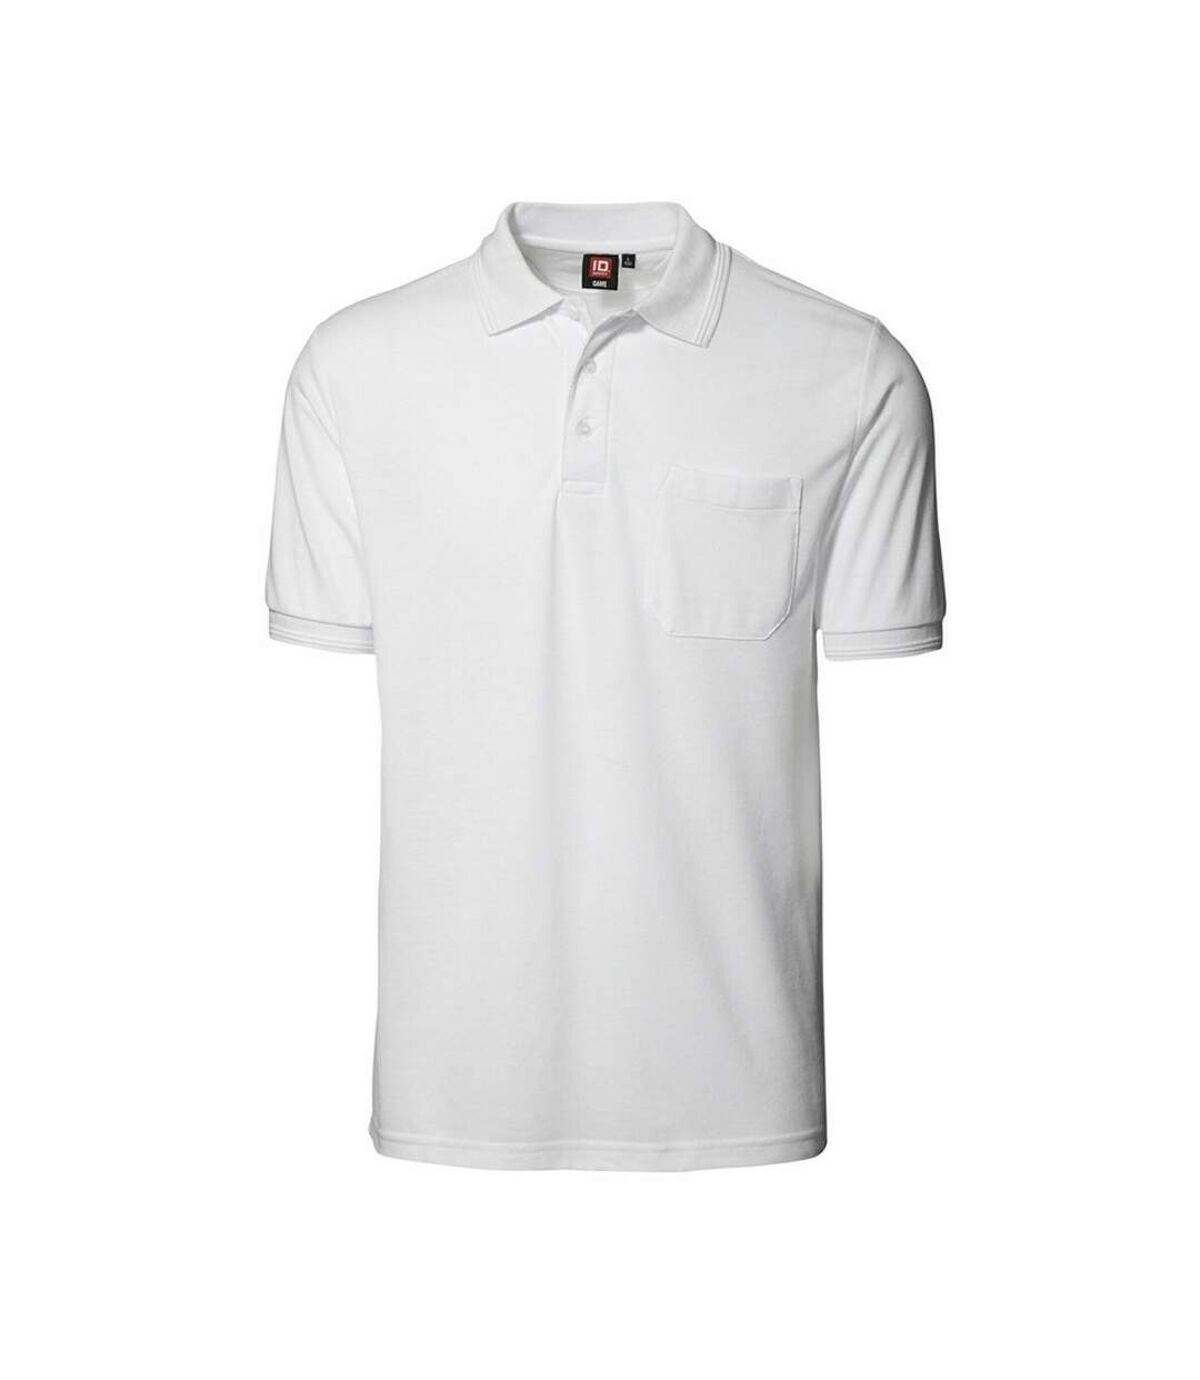 ID Mens Classic Short Sleeve Pique Regular Fitting Polo Shirt With Pocket (White) - UTID182